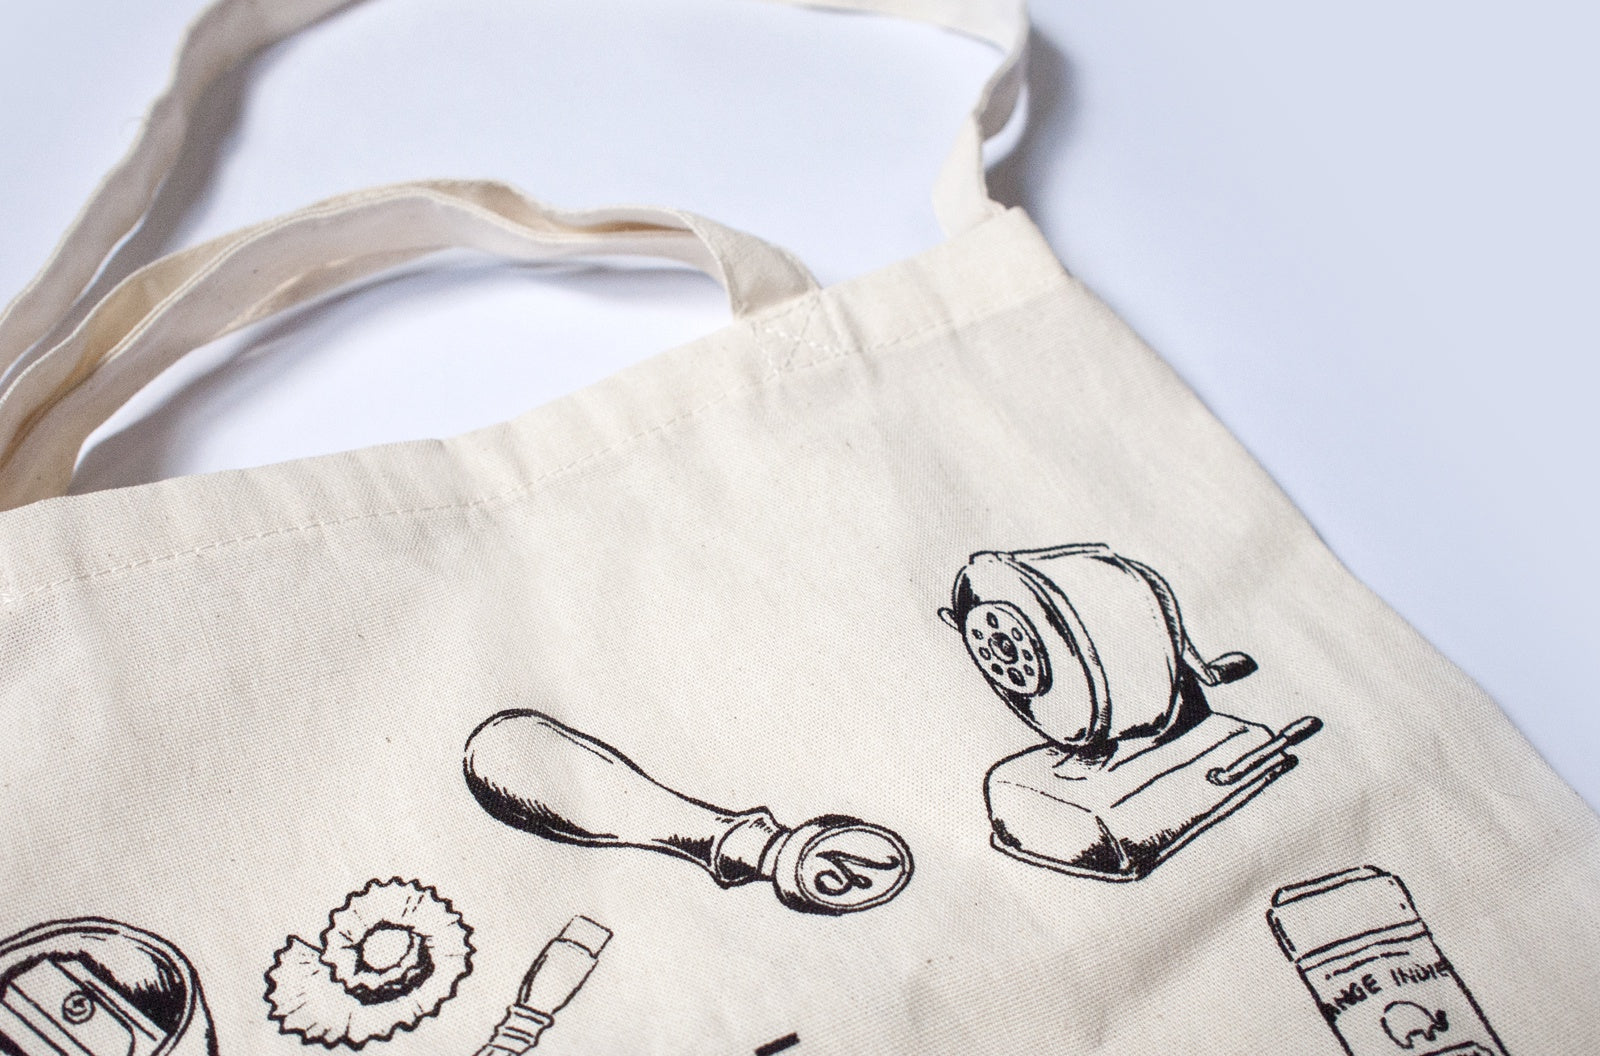 Tote Bag | The Uncommon Beauty in Common Things - Lifestory - Tools to Liveby